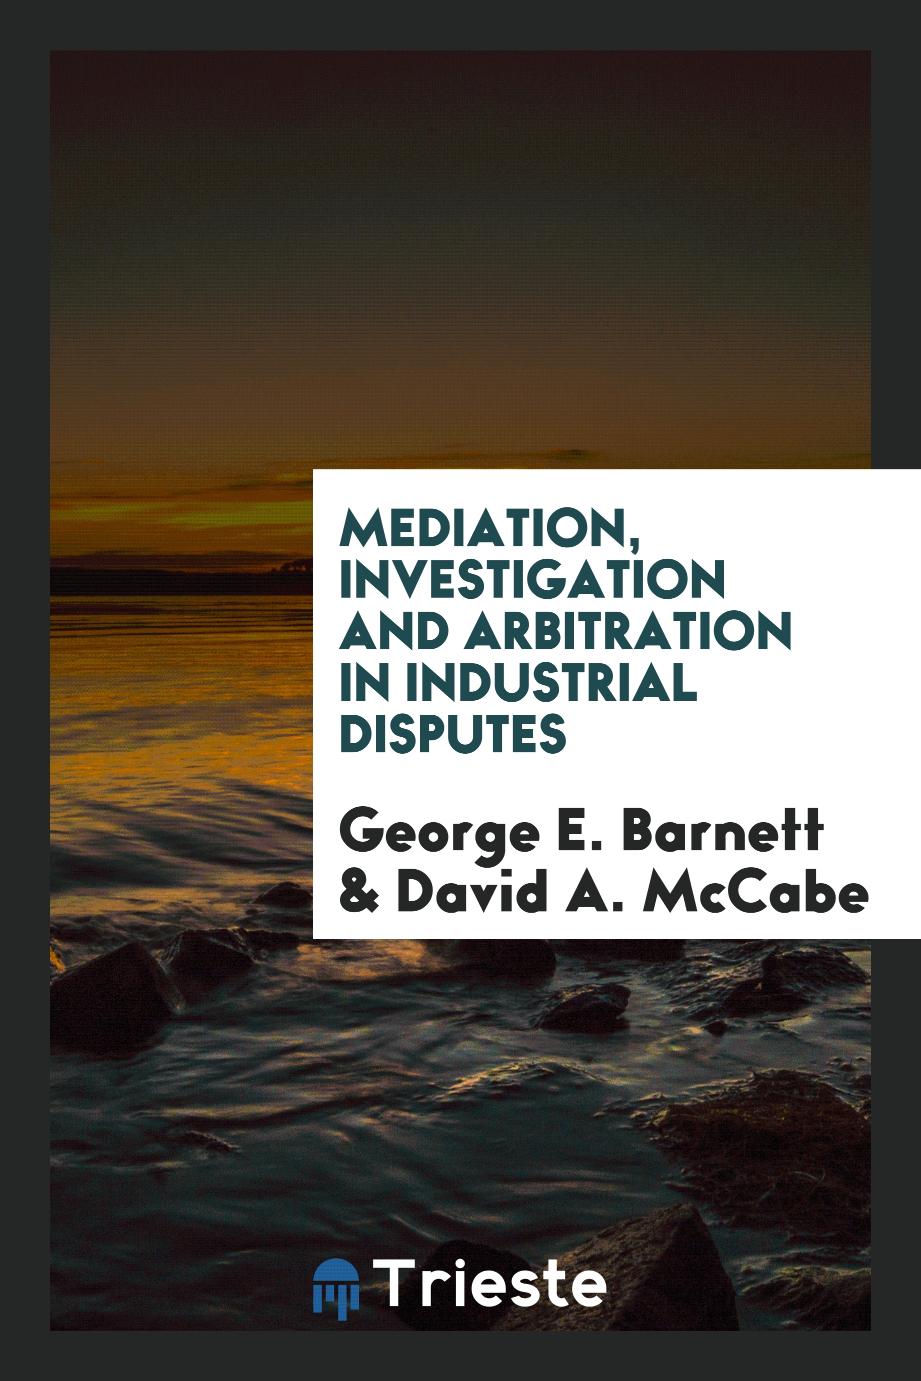 Mediation, investigation and arbitration in industrial disputes